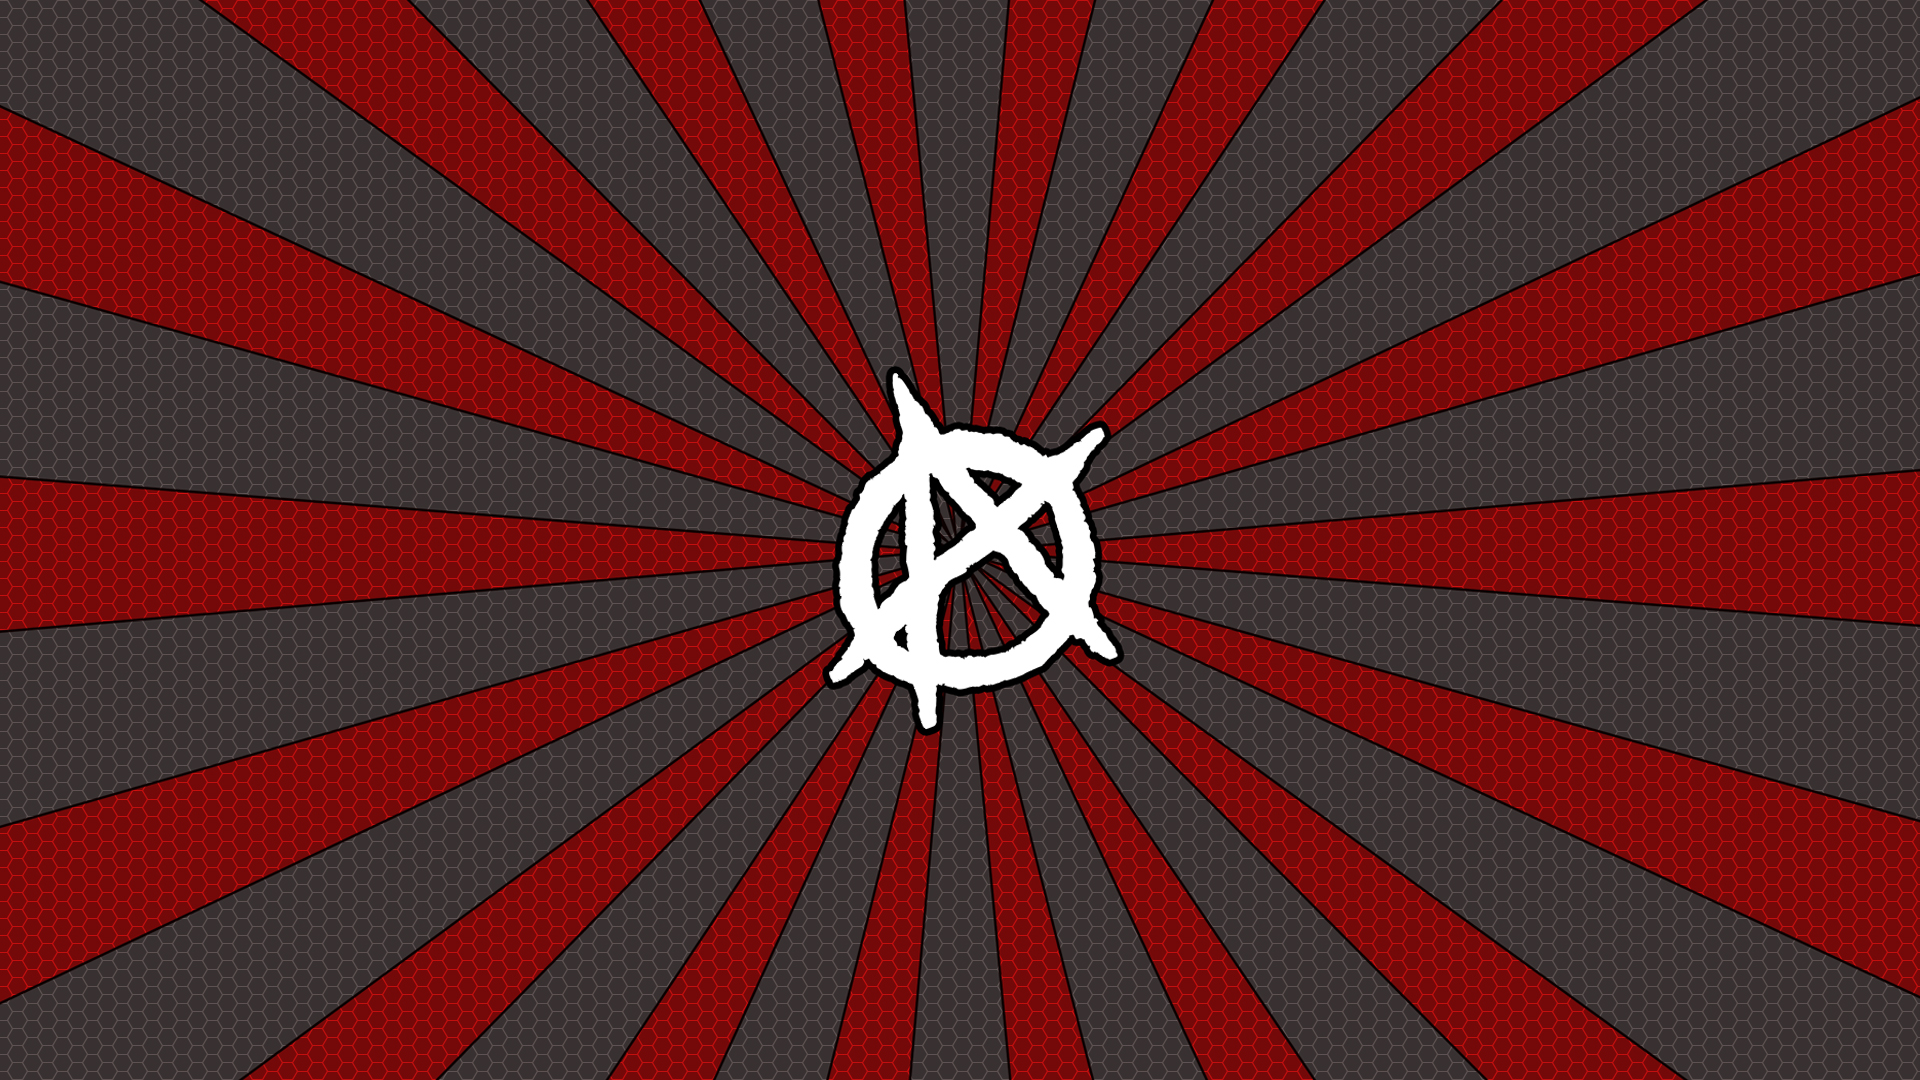 Anarchy Wallpaper Modern By Imtabe